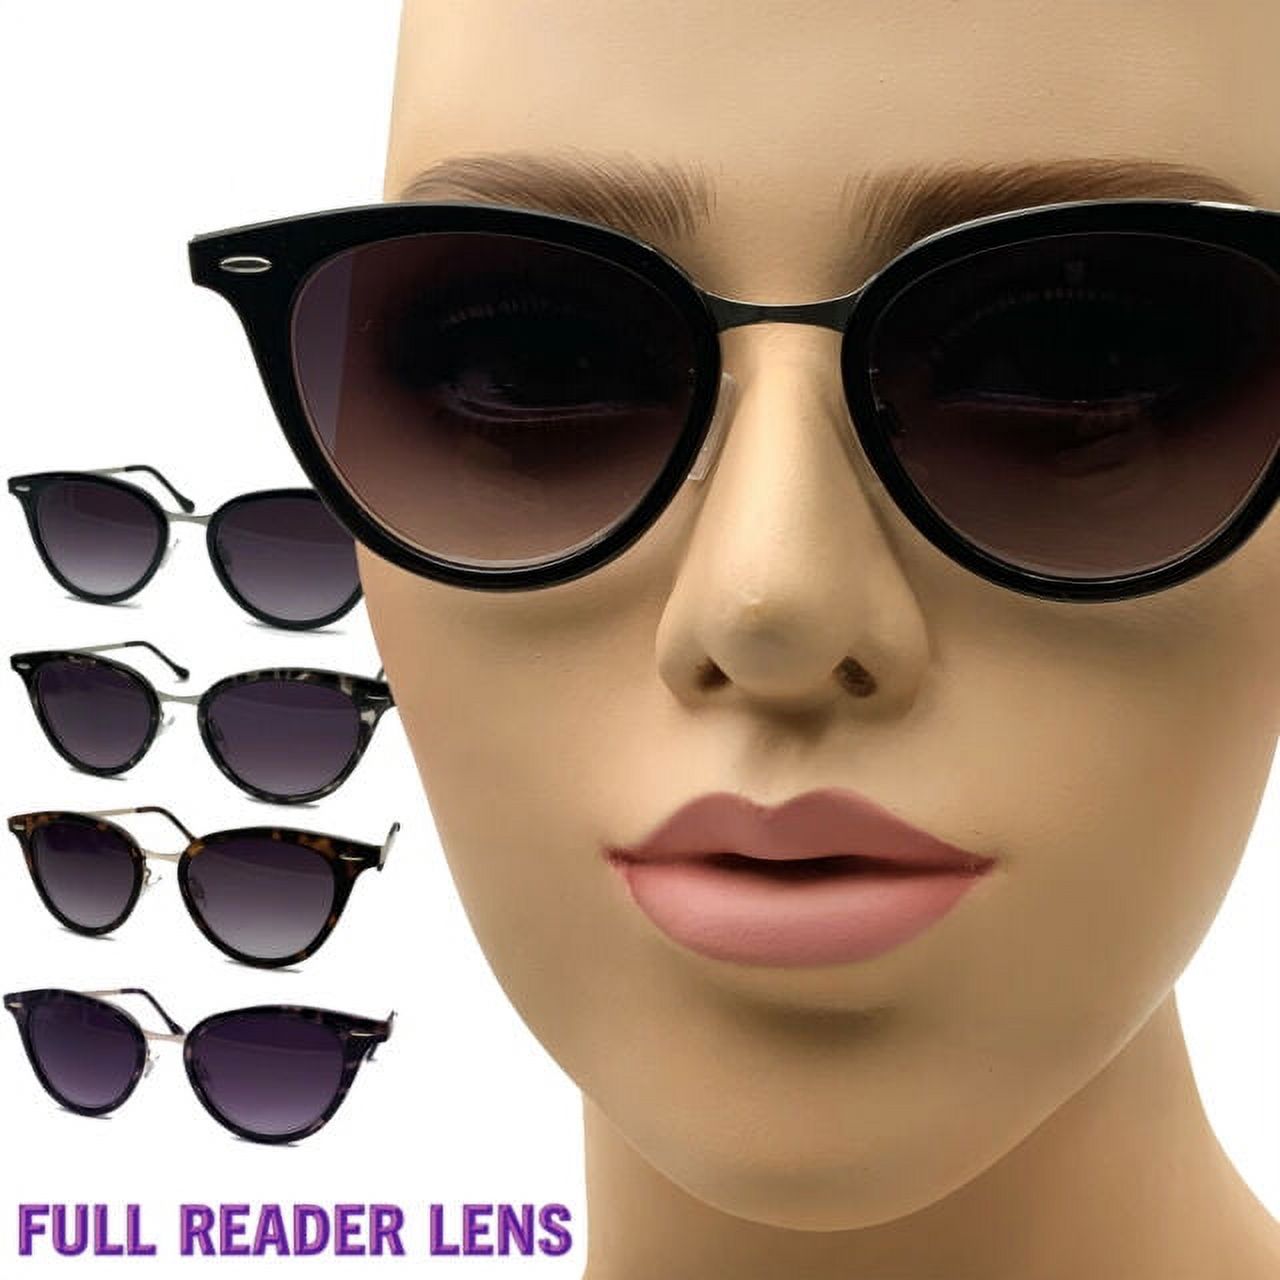 grinderPUNCH Womens Cat Eye Full Lens Magnified Tinted Readers Reading Sunglasses - Tortoise,+1.25 strength - image 4 of 4